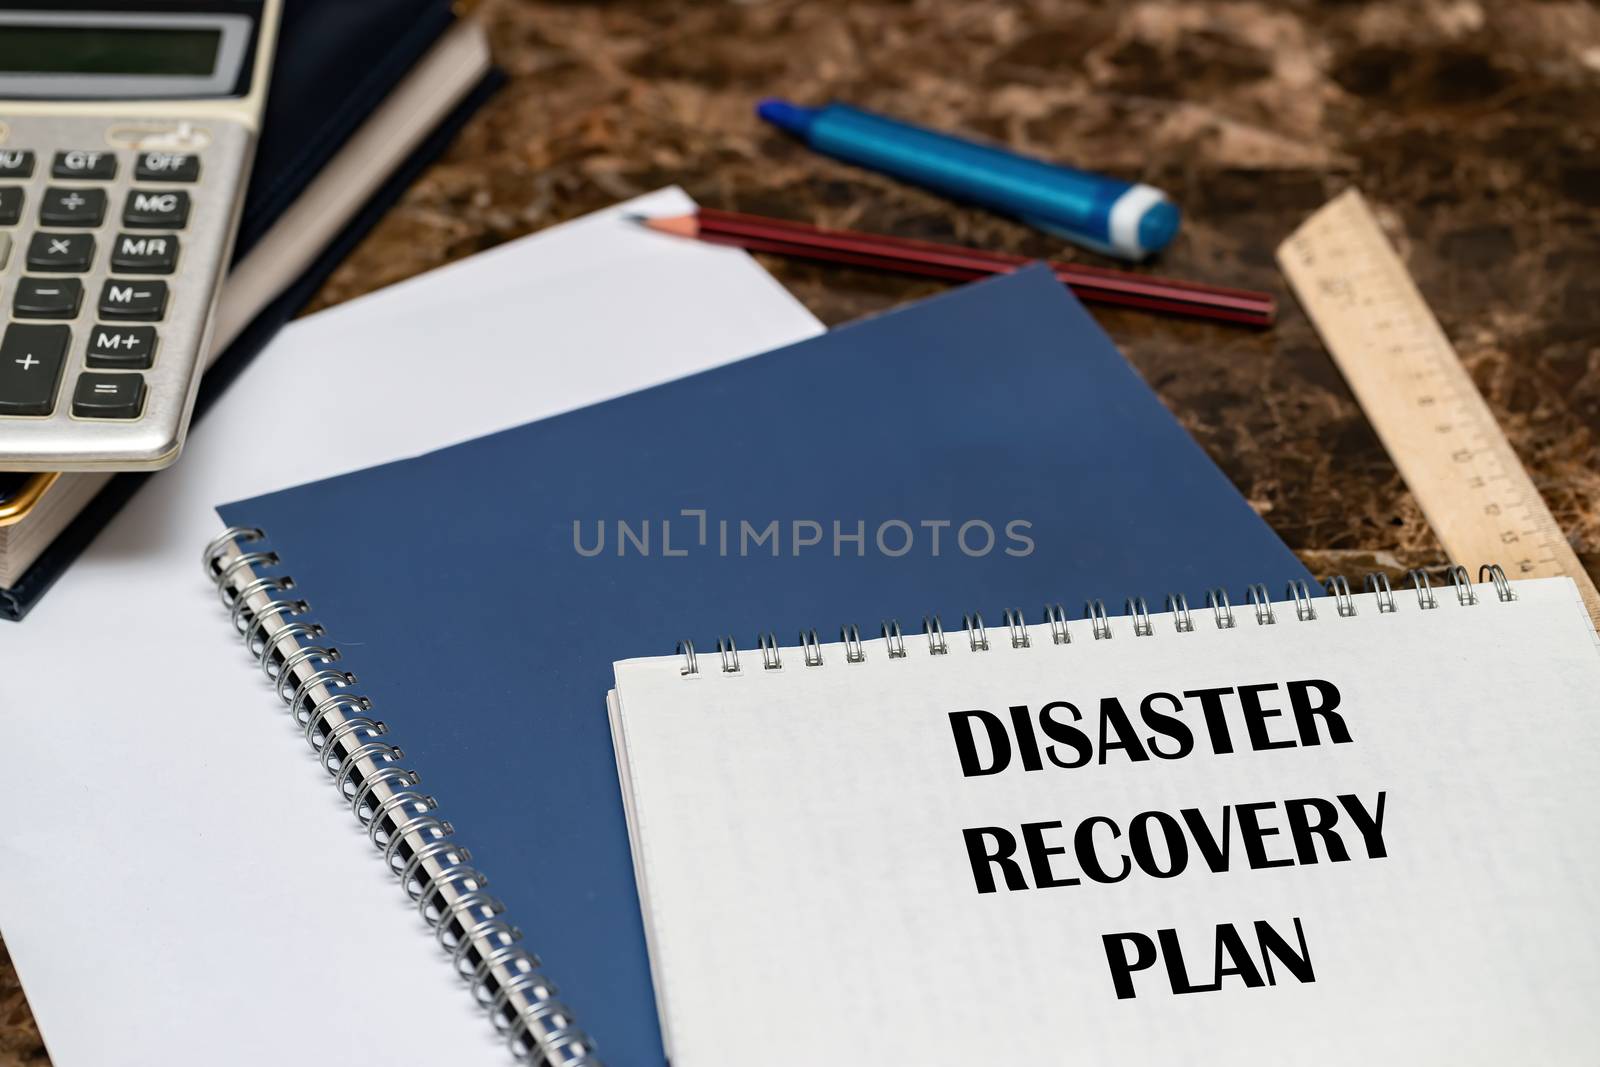 The text of the Disaster Recovery Plan is written on a white sheet lying on the office Desk.